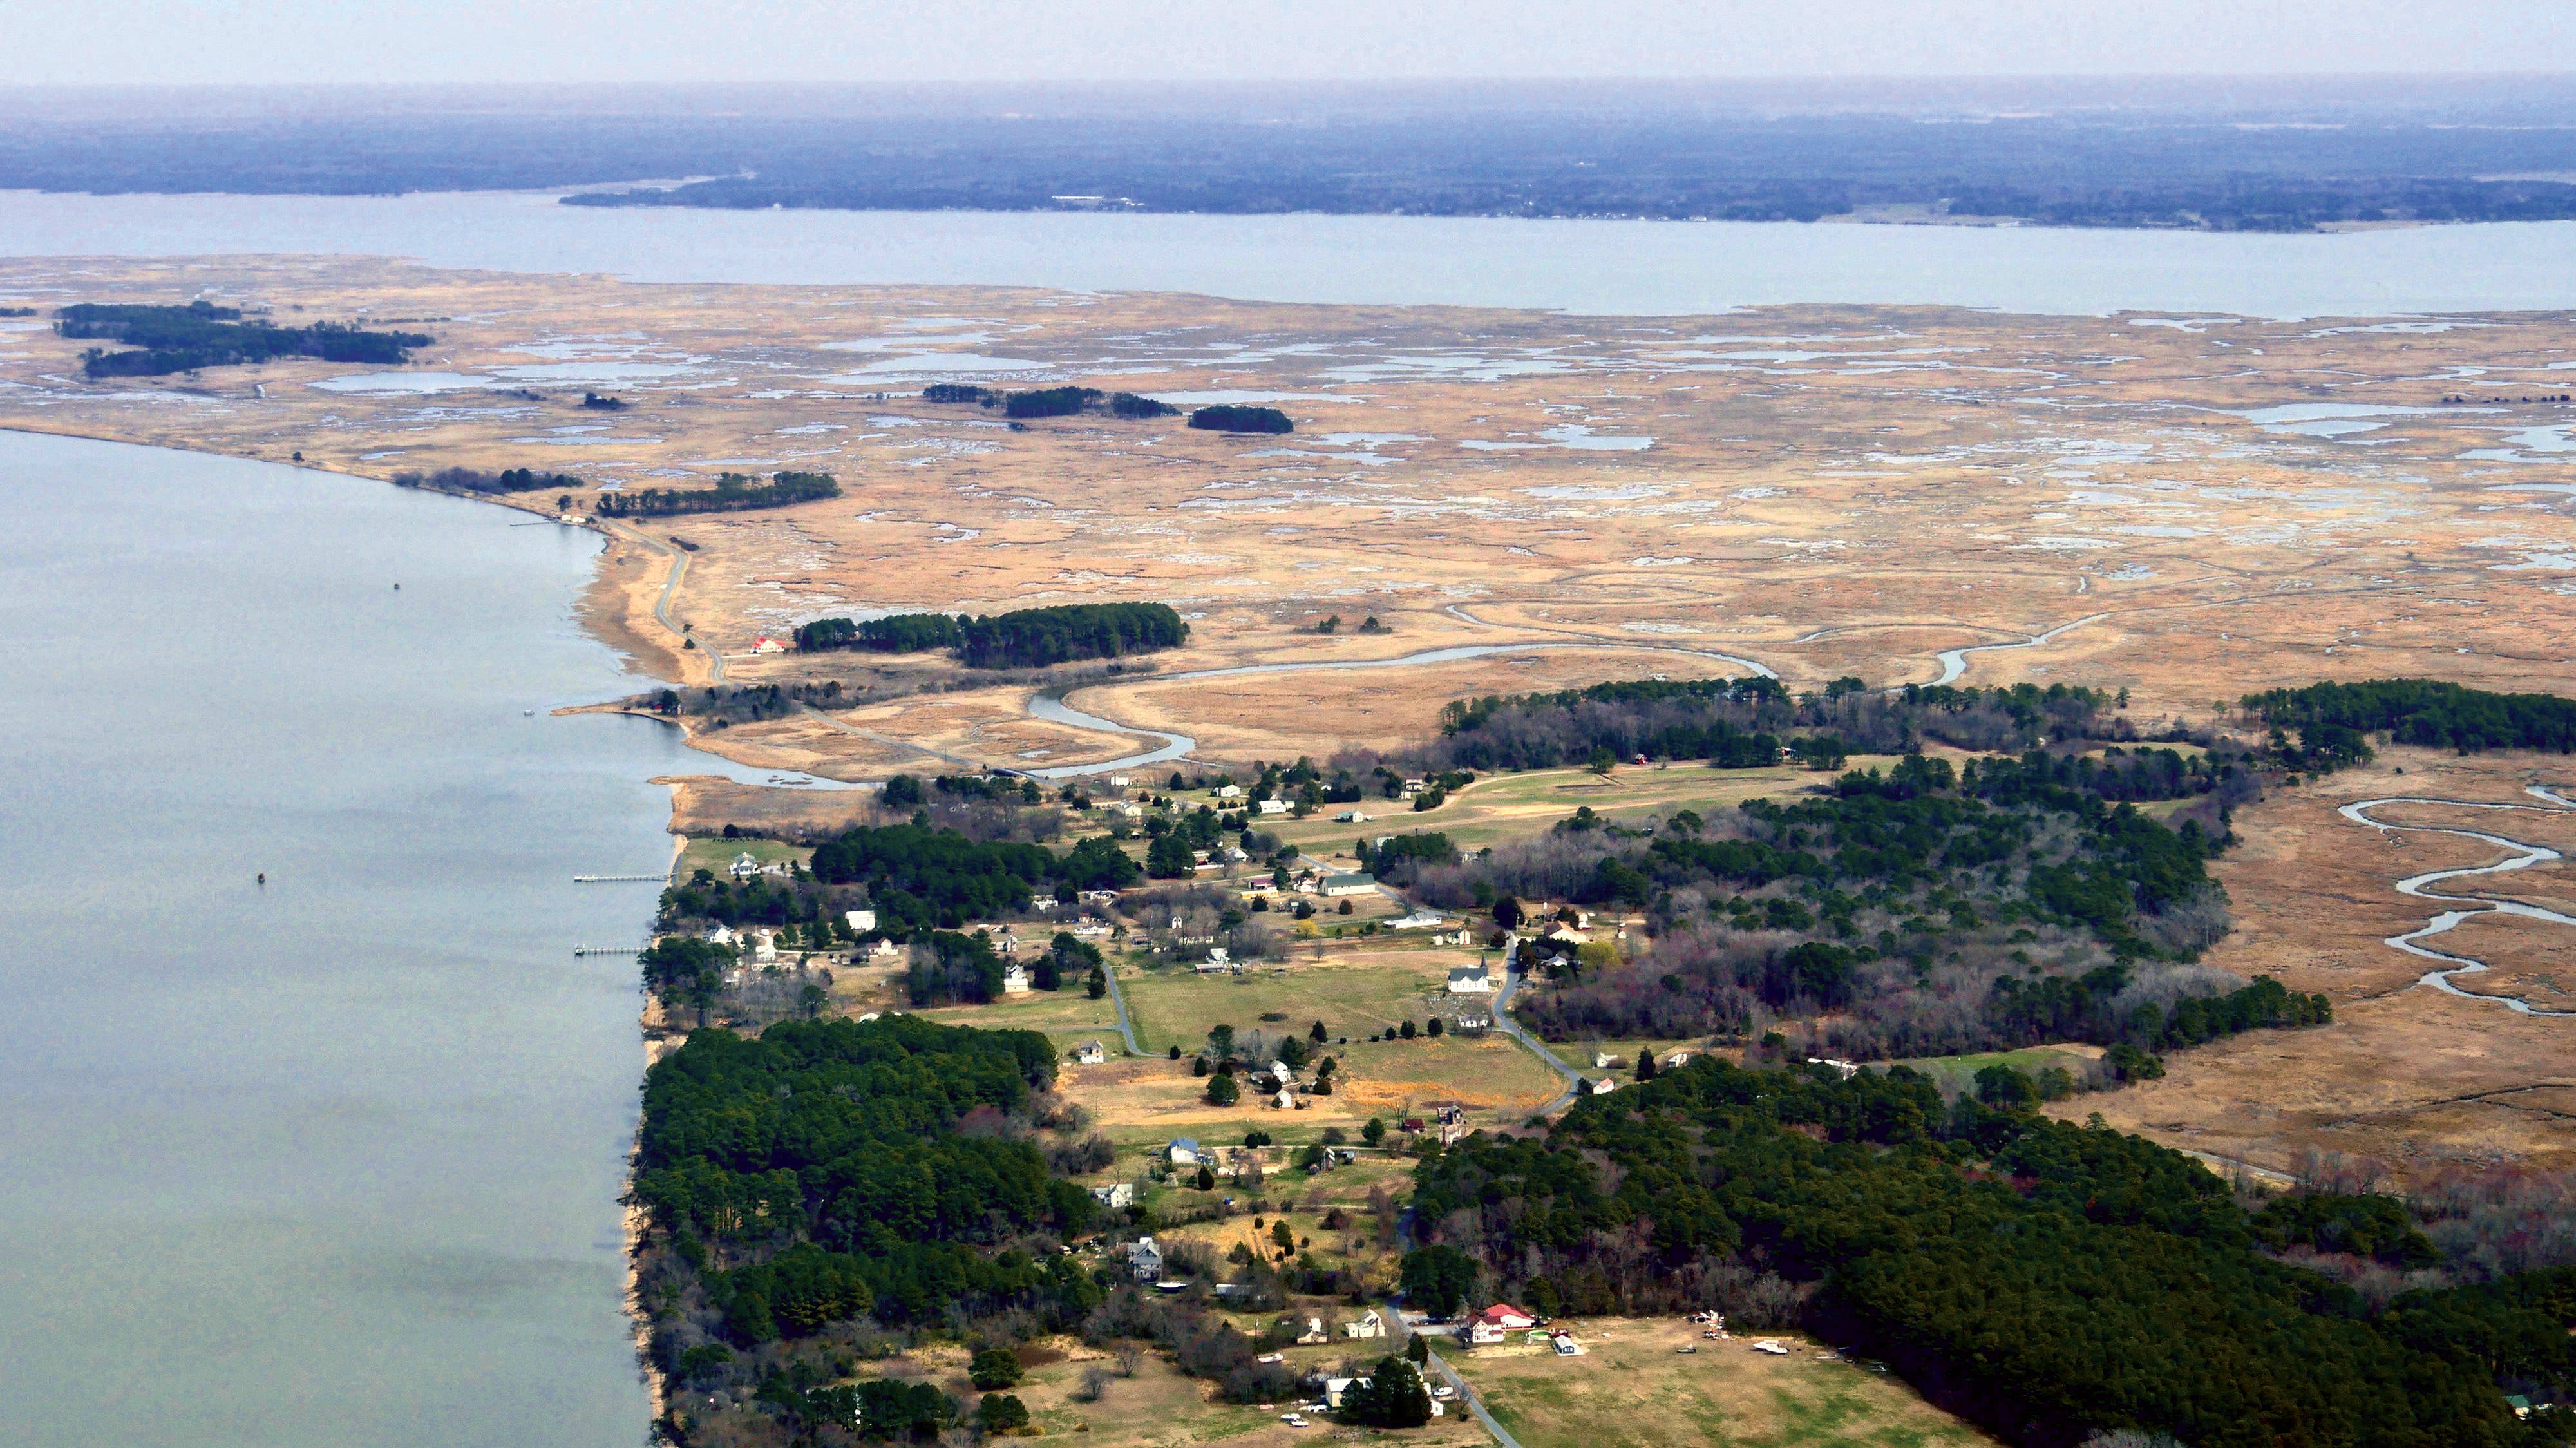 Aerial view looking down on a cluster of houses in a small coastal community. Open water faces the homes with marsh extending into the background.